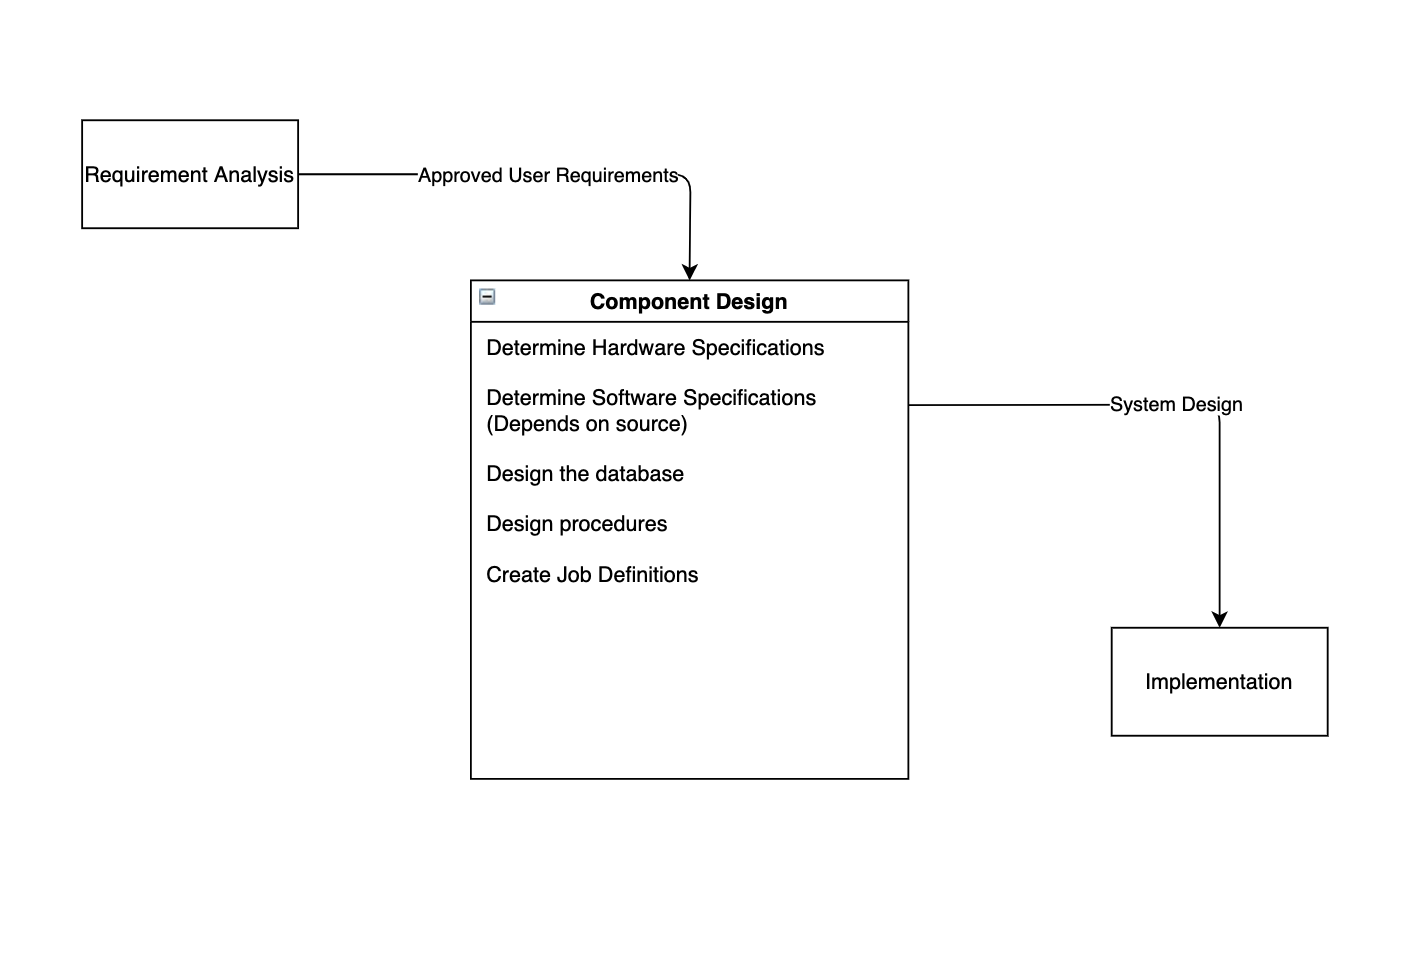 Requirement analysis flows through approved user requirements to component design. The component design has the following items listed: Determine hardware specifications, determine software specifications (depends on source), design the database, design procedures, and create job definitions. through system design, ends at implementation